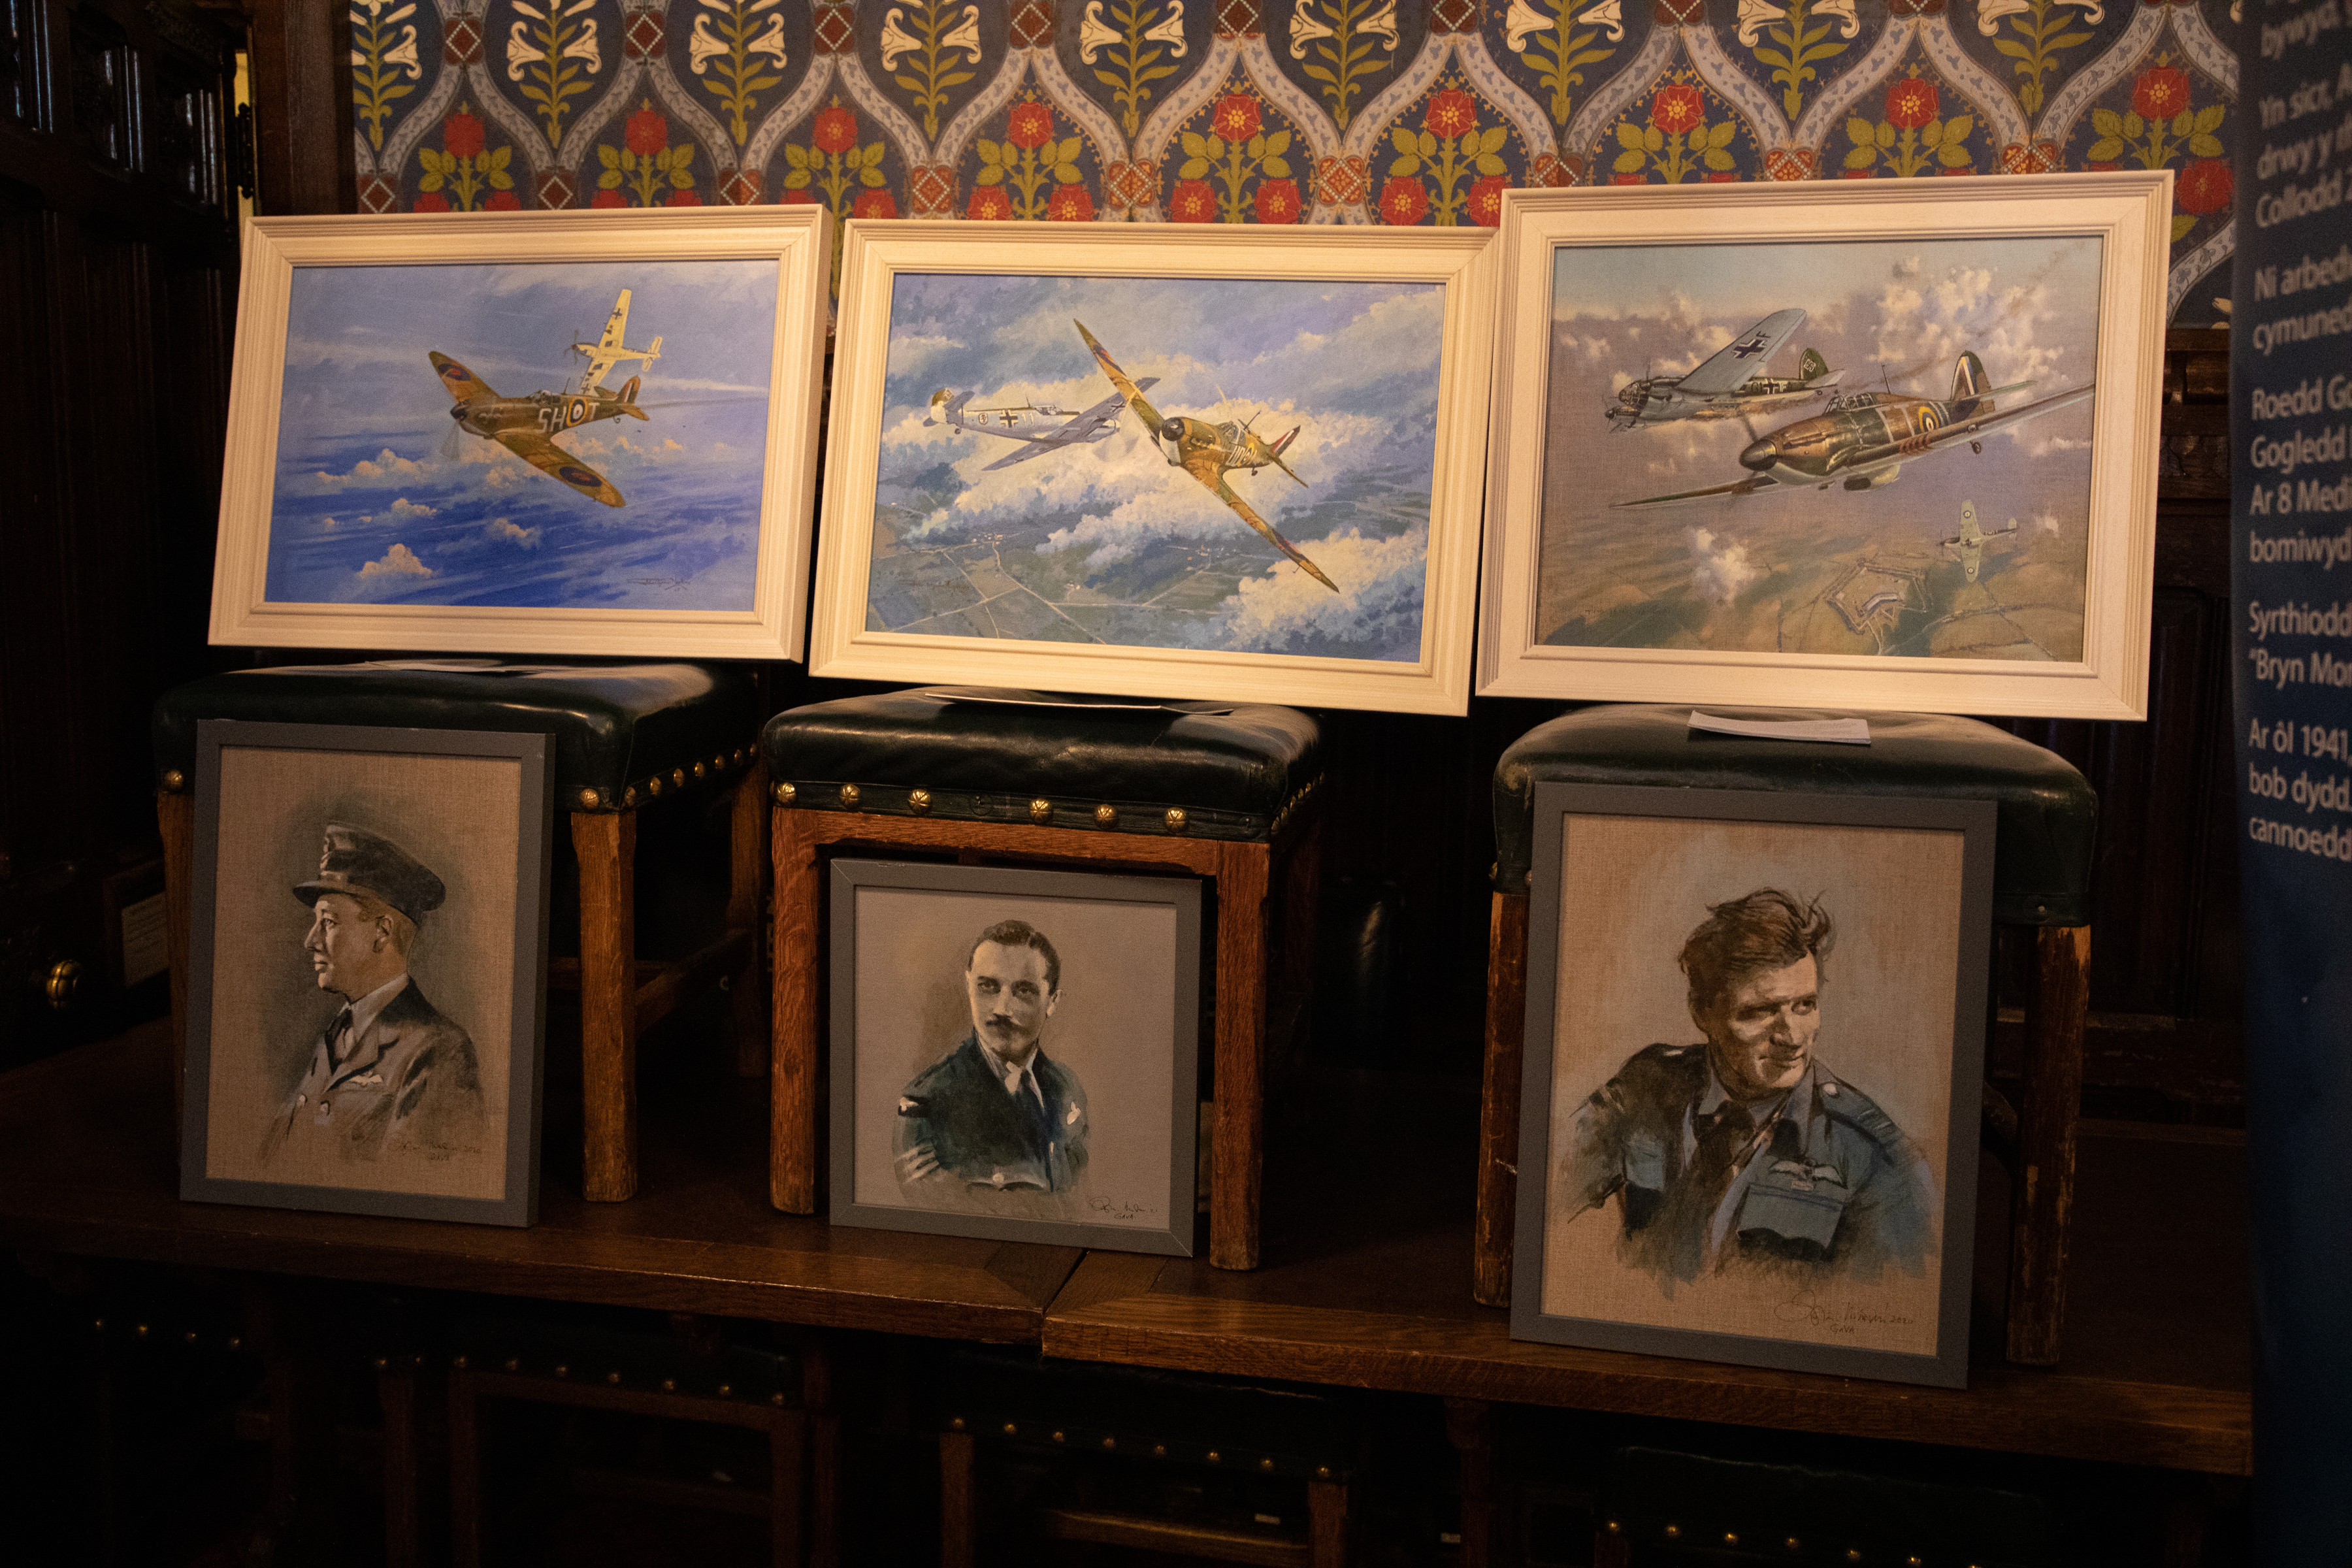 Image shows six portraits of RAF aviators and Spitfires on display in exhibit.